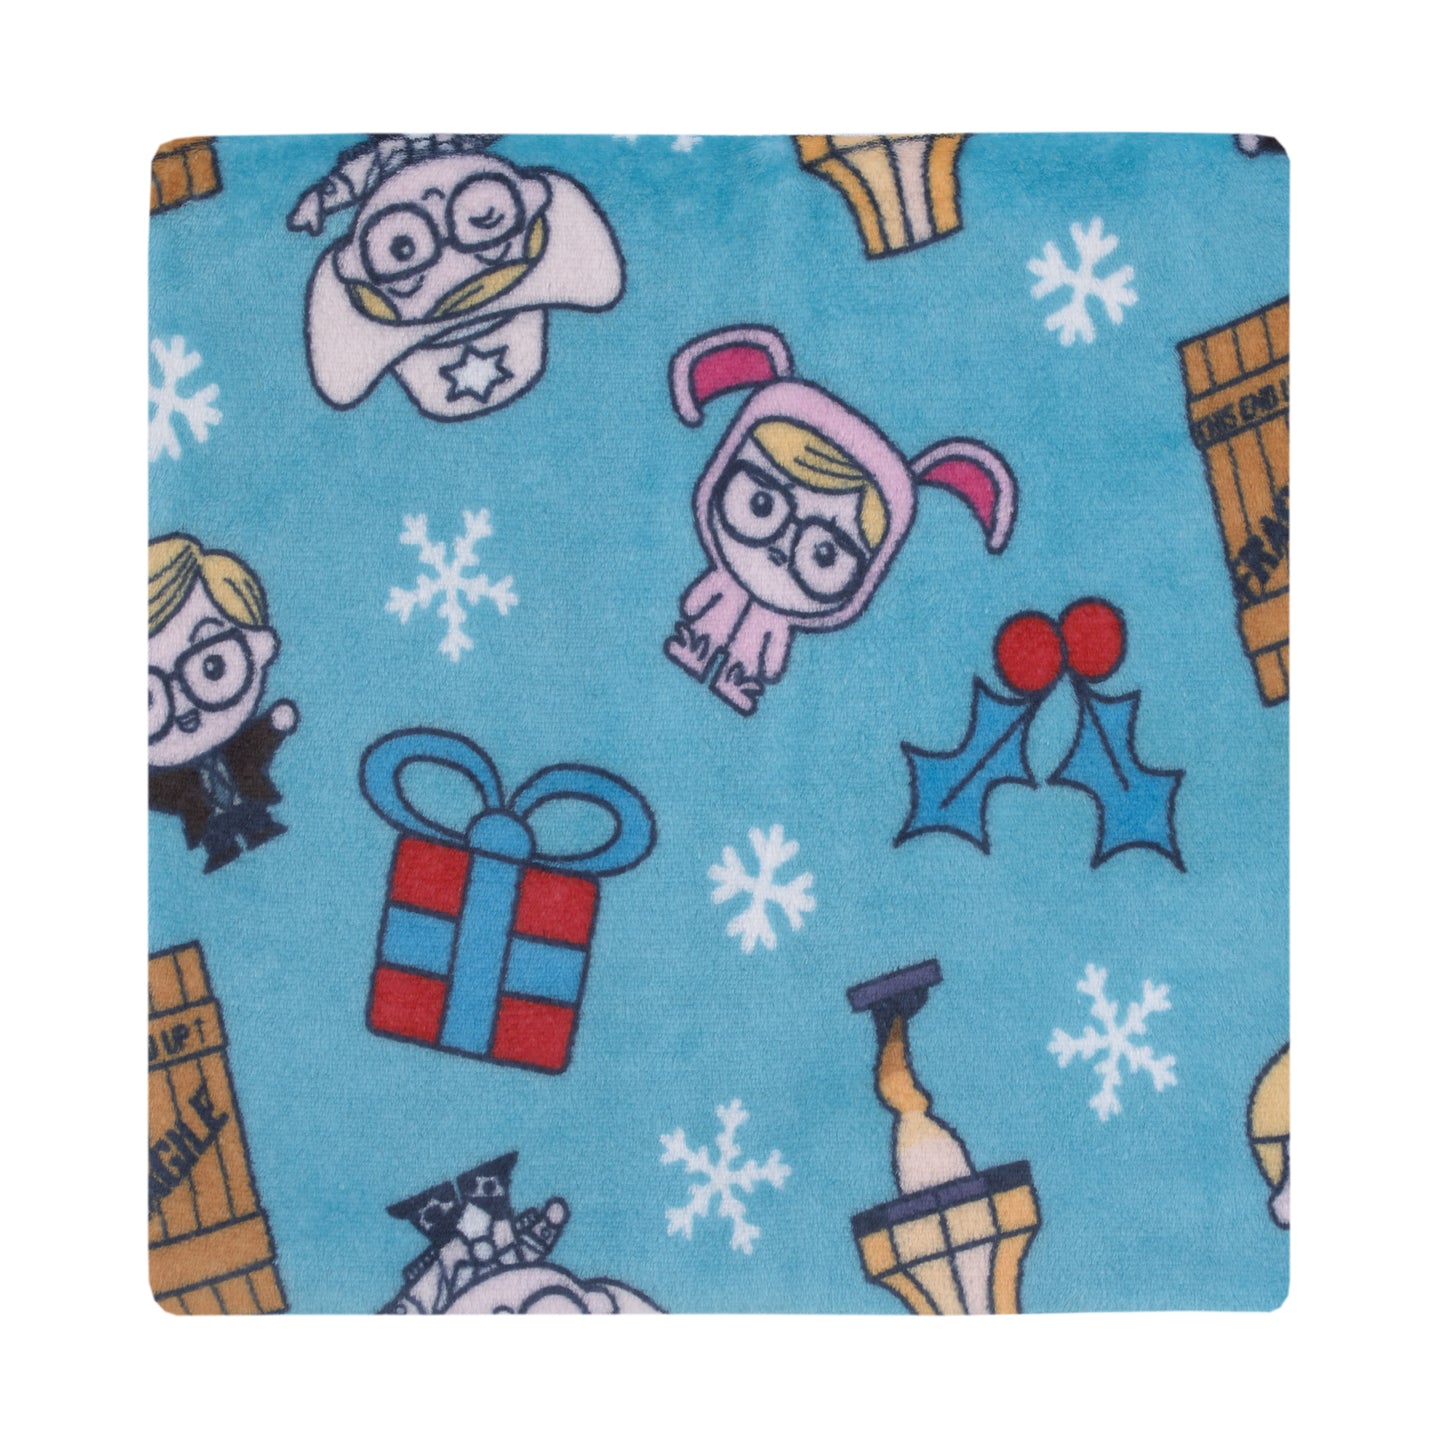 Warner Brothers A Christmas Story Blue, White, and Red Super Soft Holiday Baby Blanket